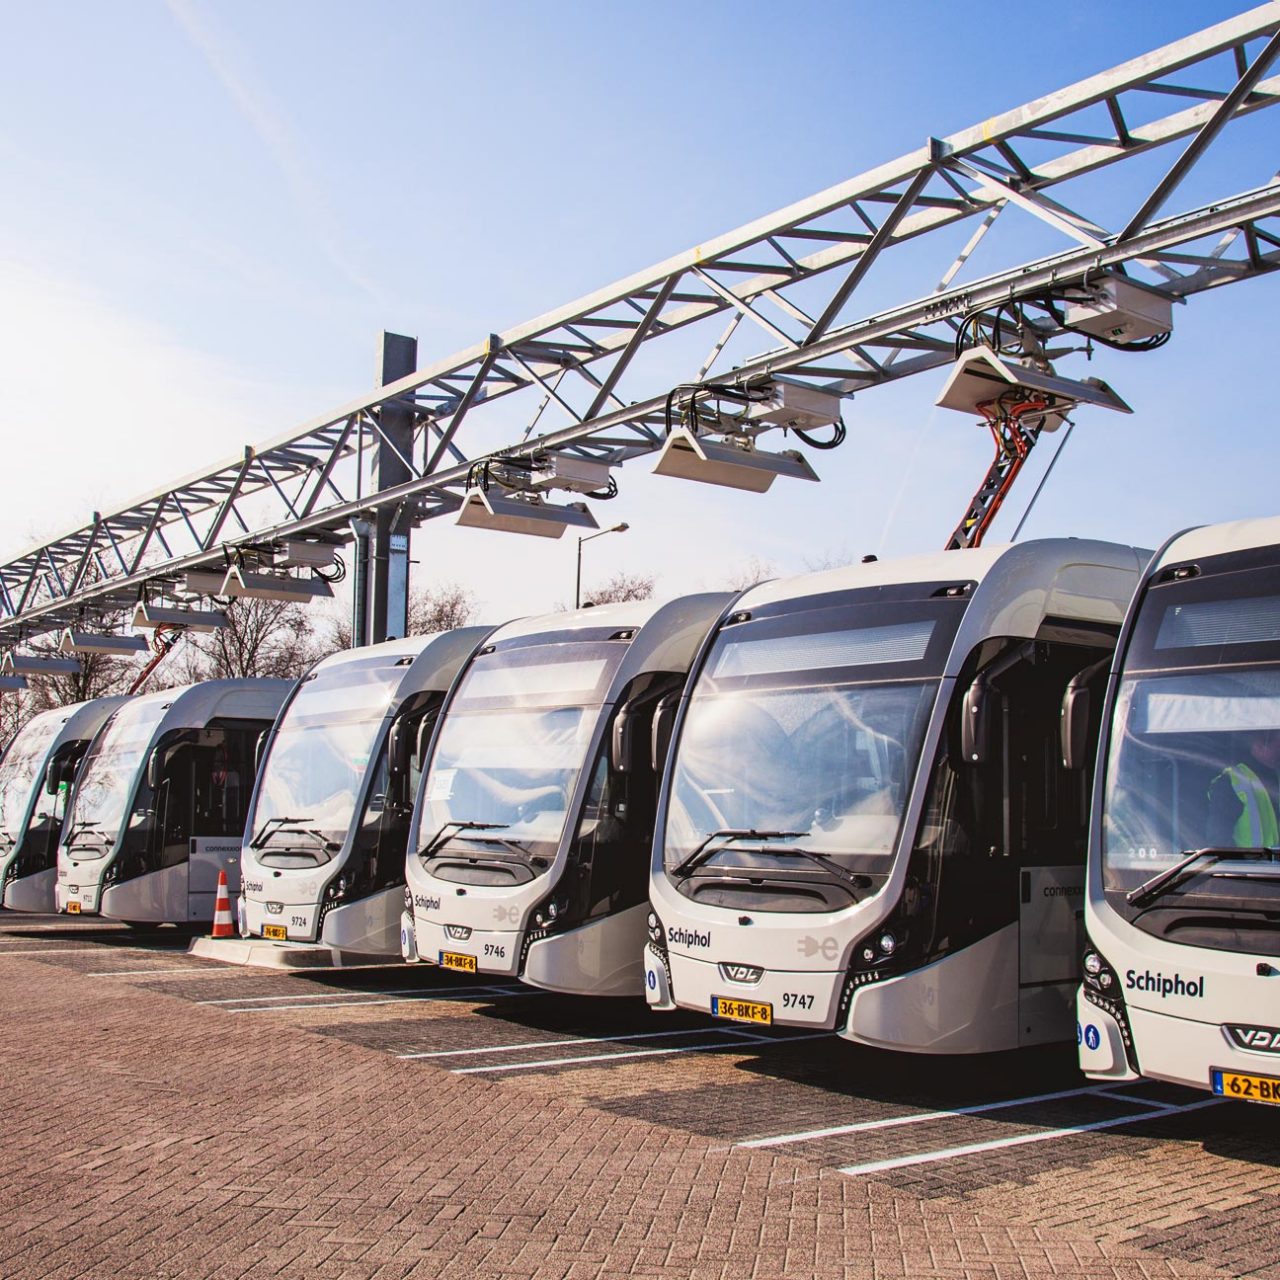 Fleet of electric buses with overhead charging equipment